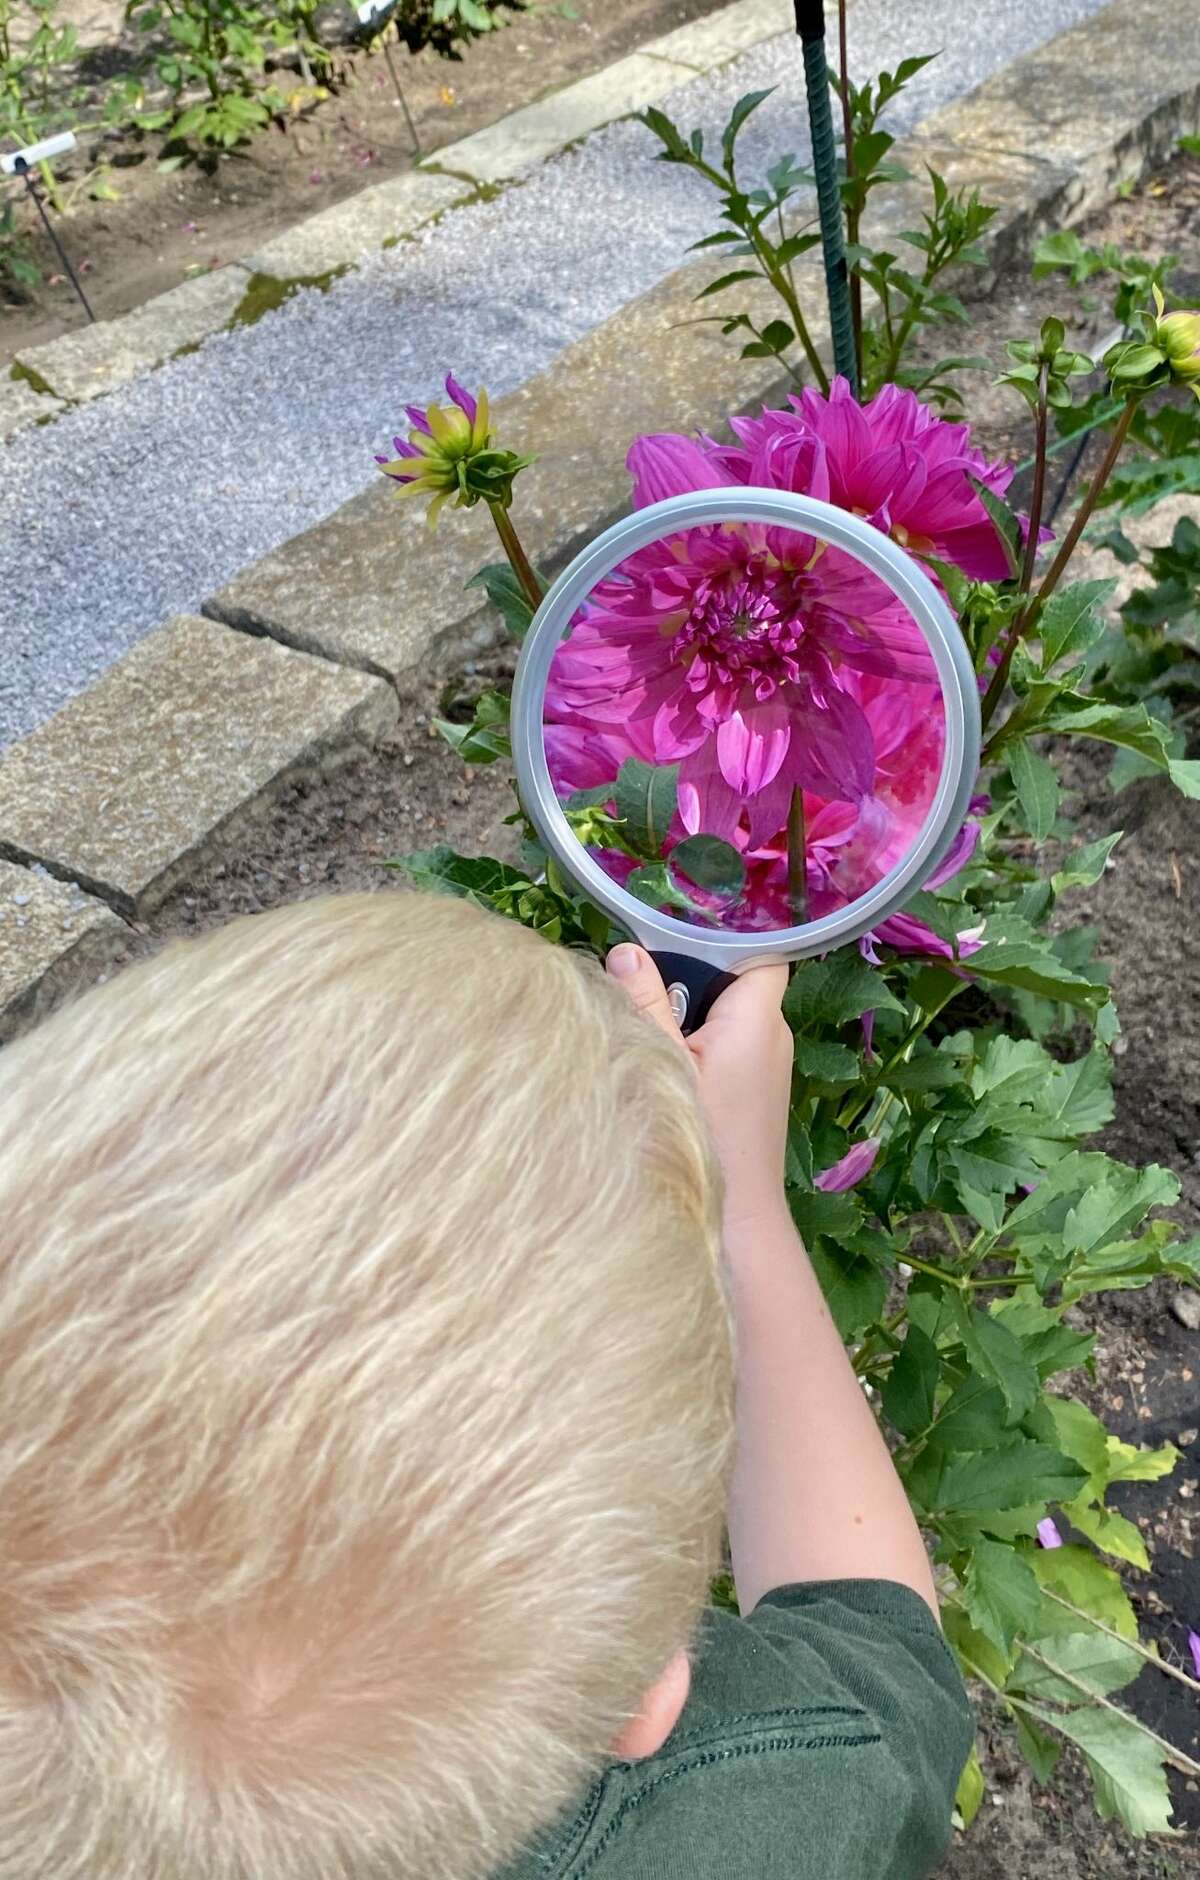 A child looks at a flower through a magnifier at Dahlia Hill in Midland.